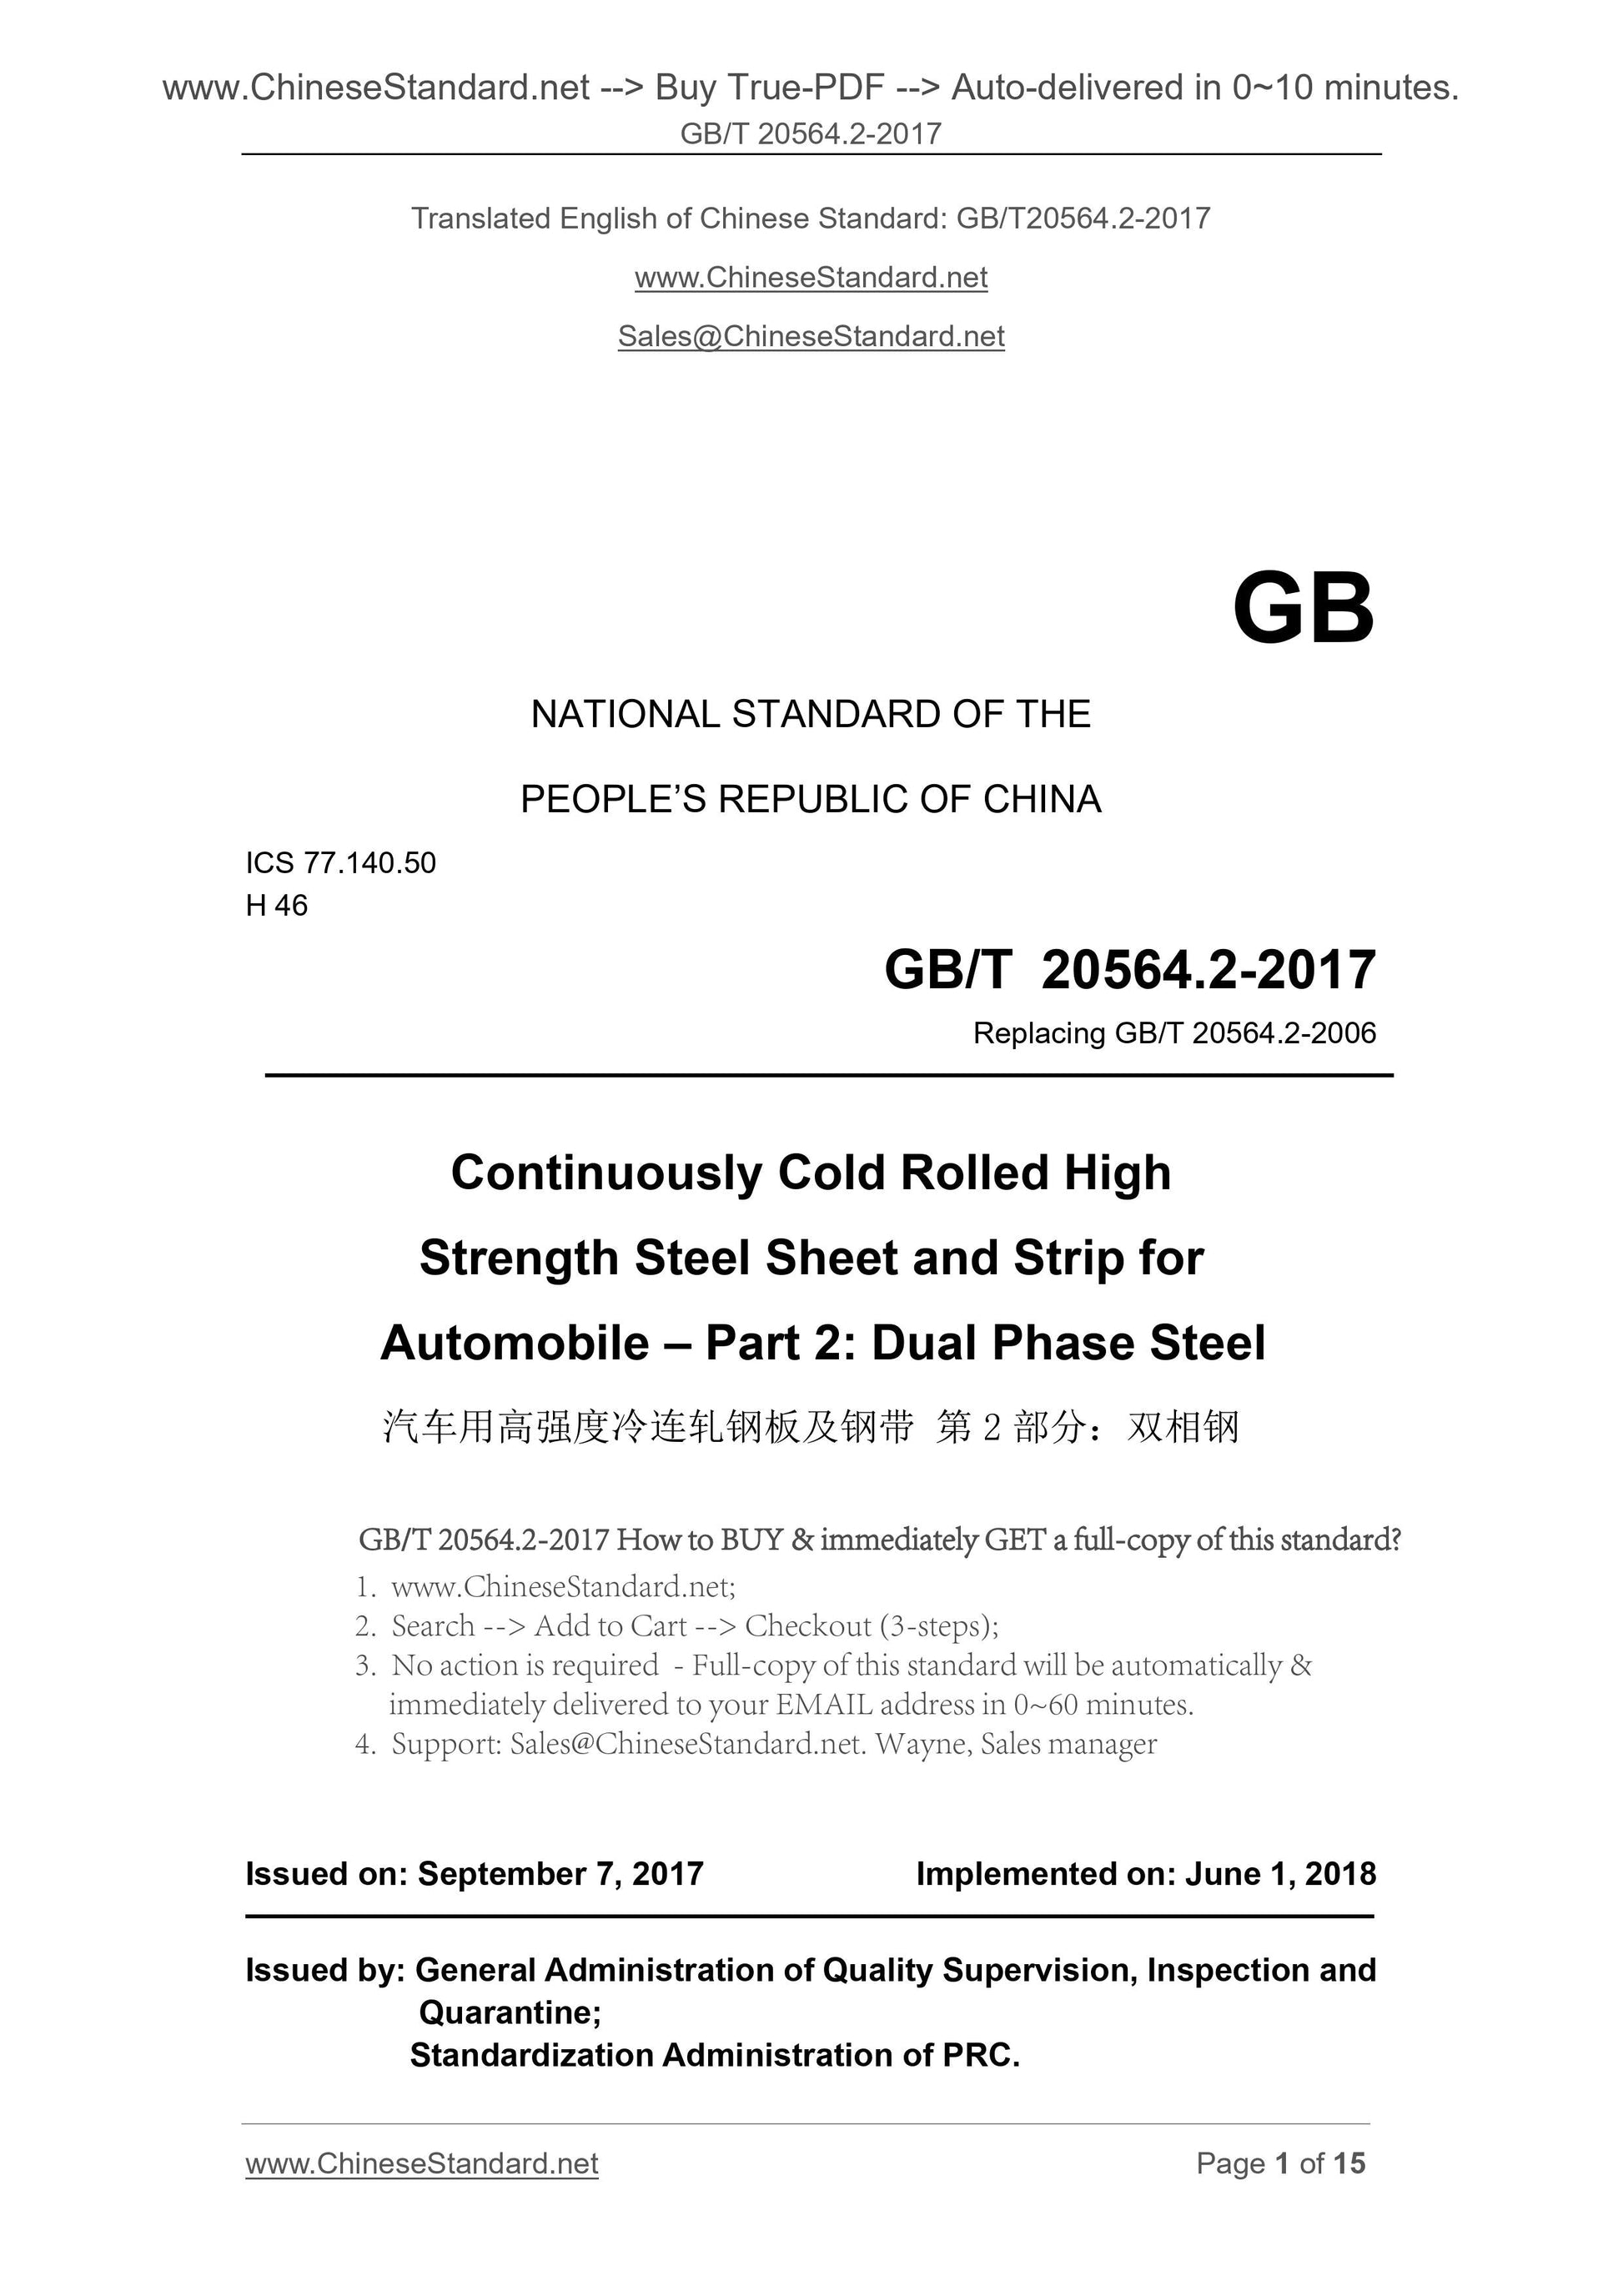 GB/T 20564.2-2017 Page 1